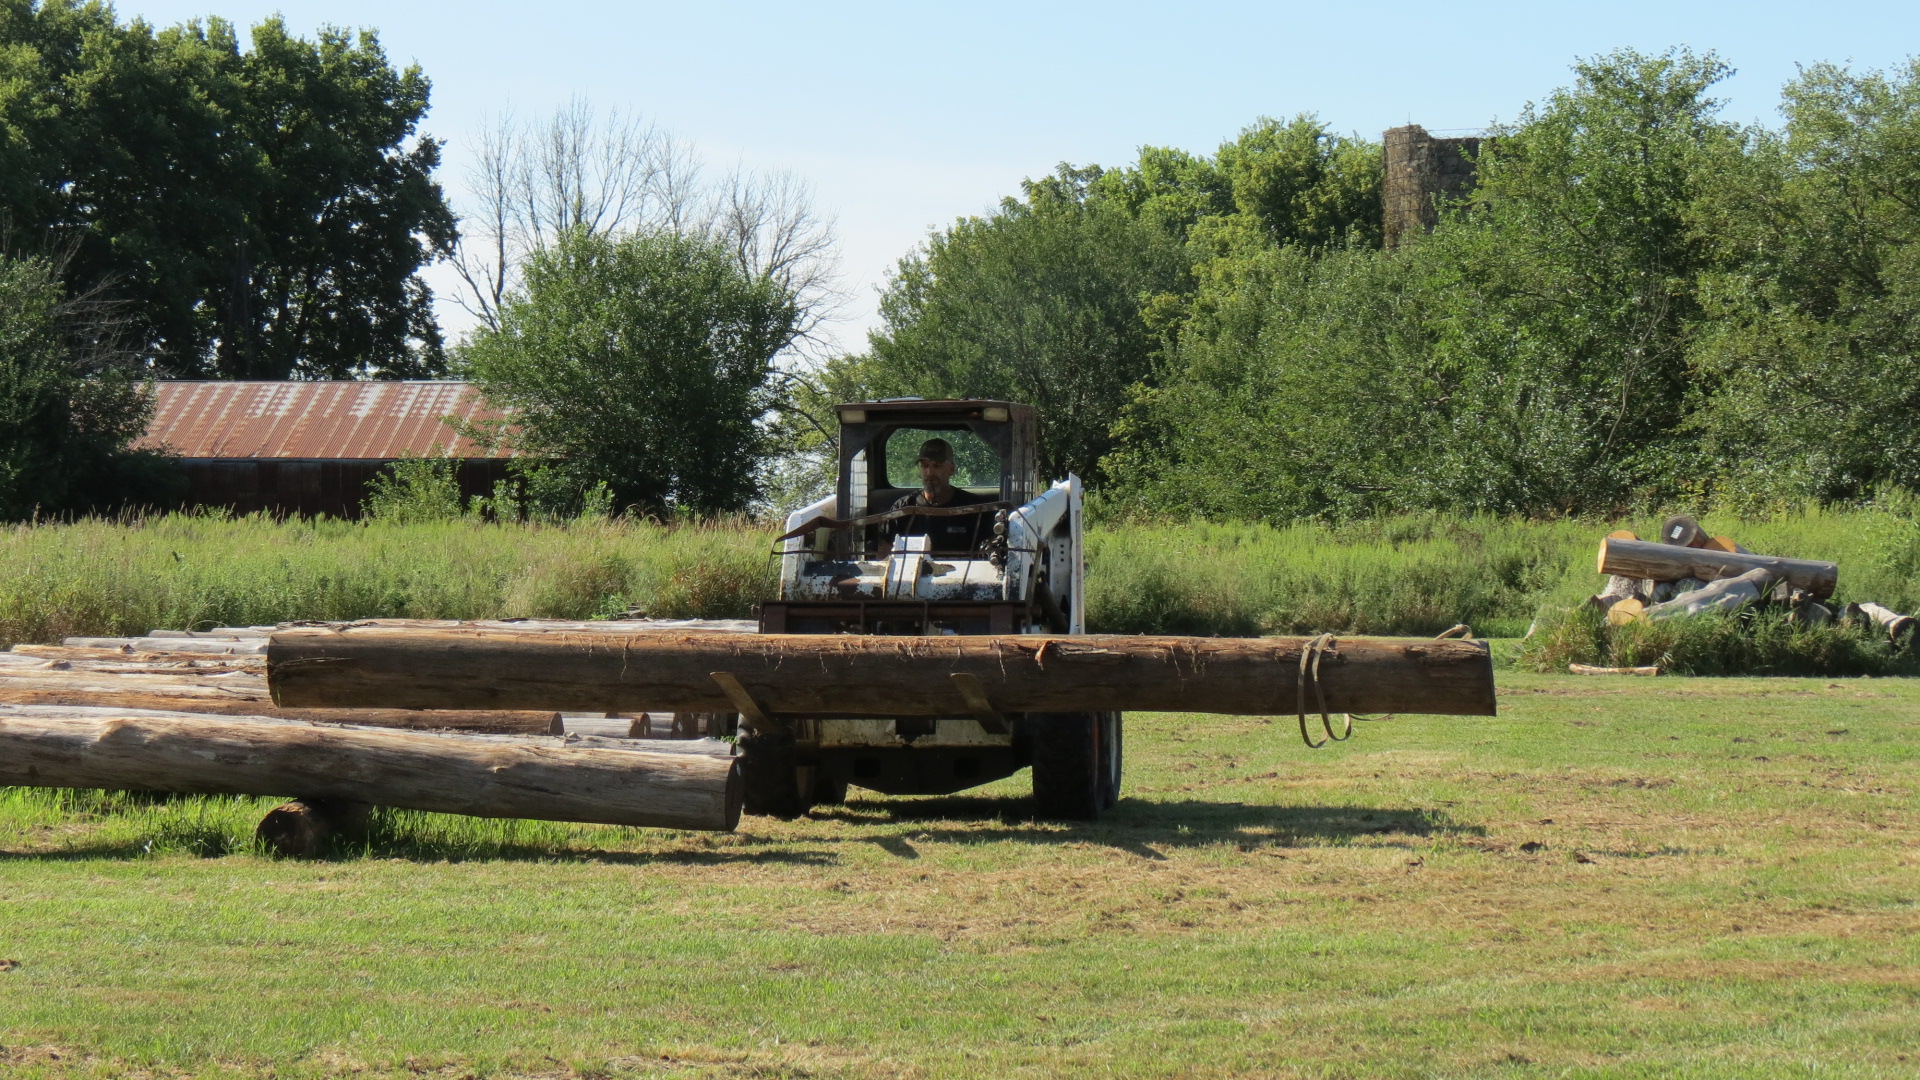 Moving logs in the lay-down area.